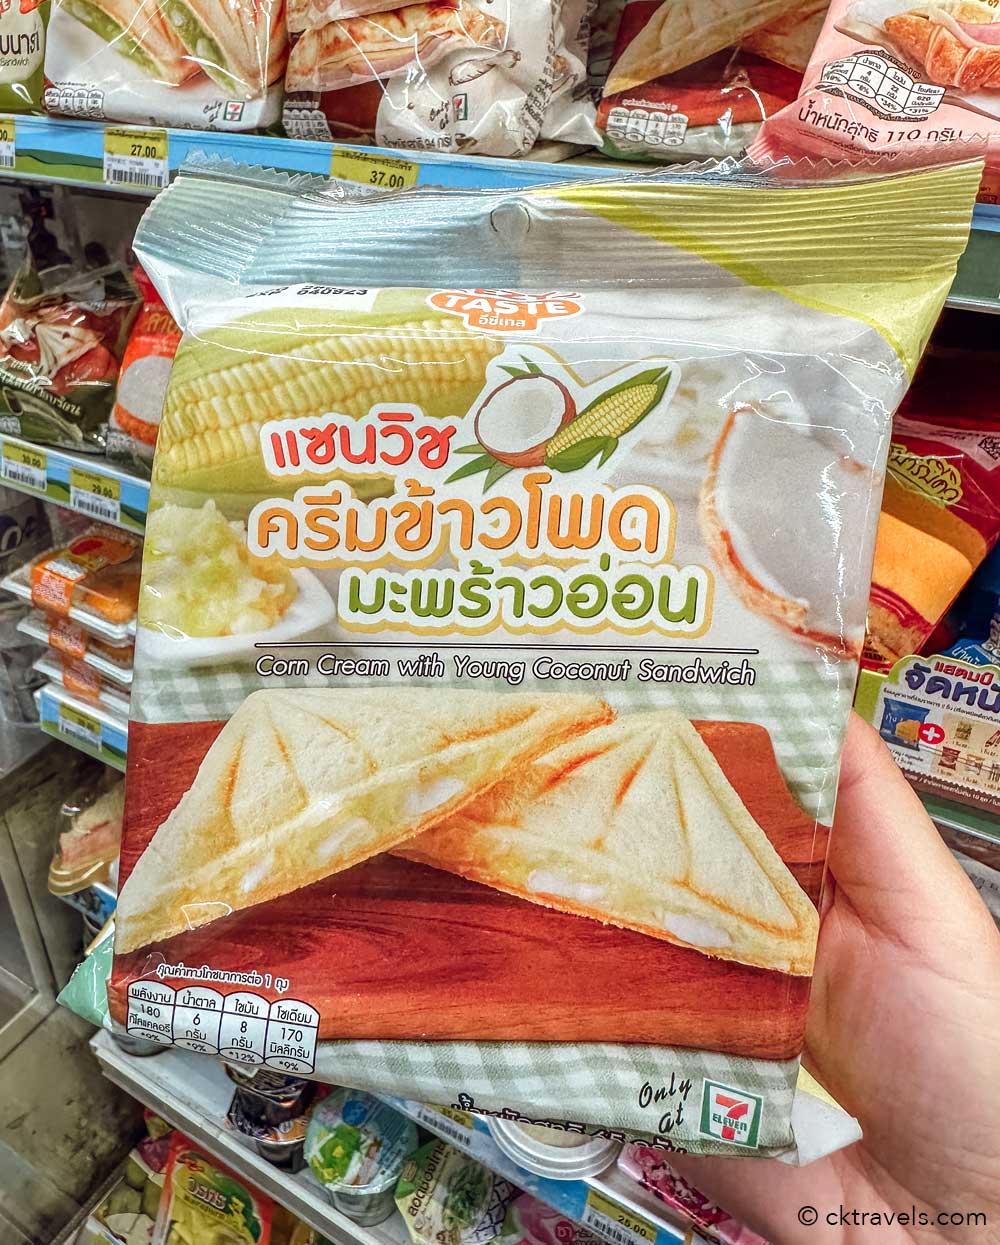 Corn Cream with Young Coconut toasted Sandwich at 7-eleven